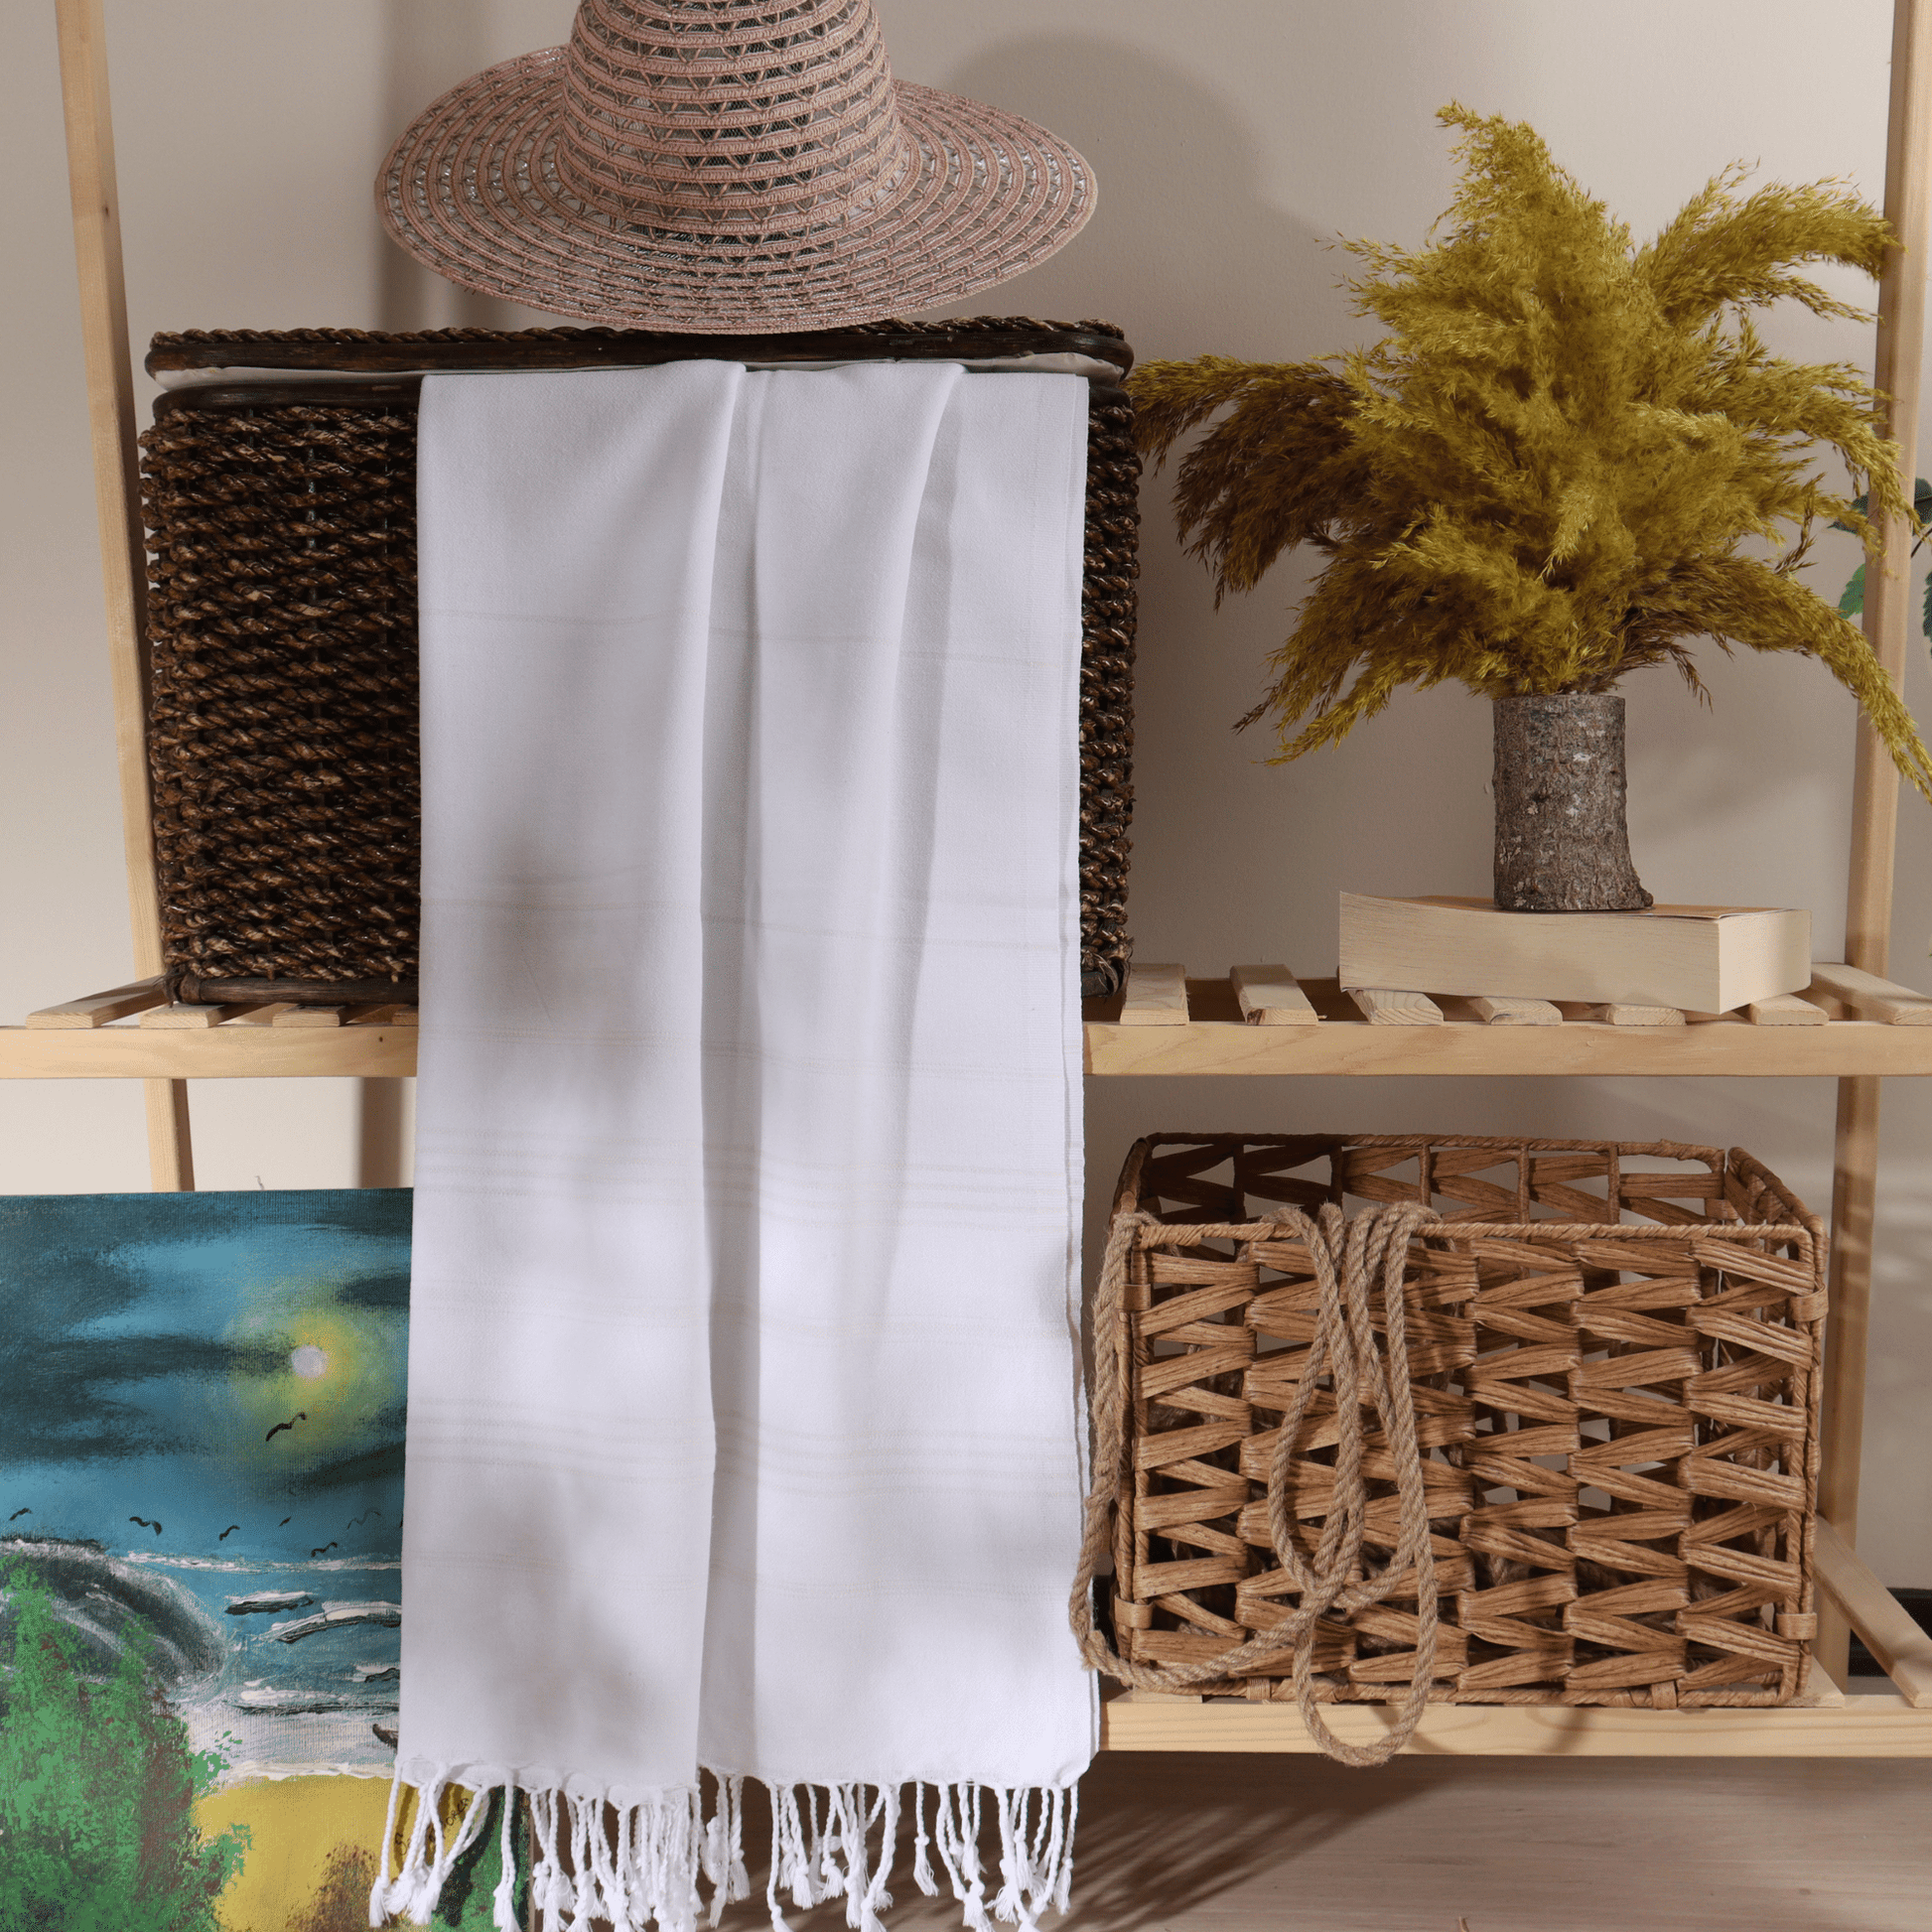 Best Turkish Towels Set of 4 Oversized Beach and Bath Towel